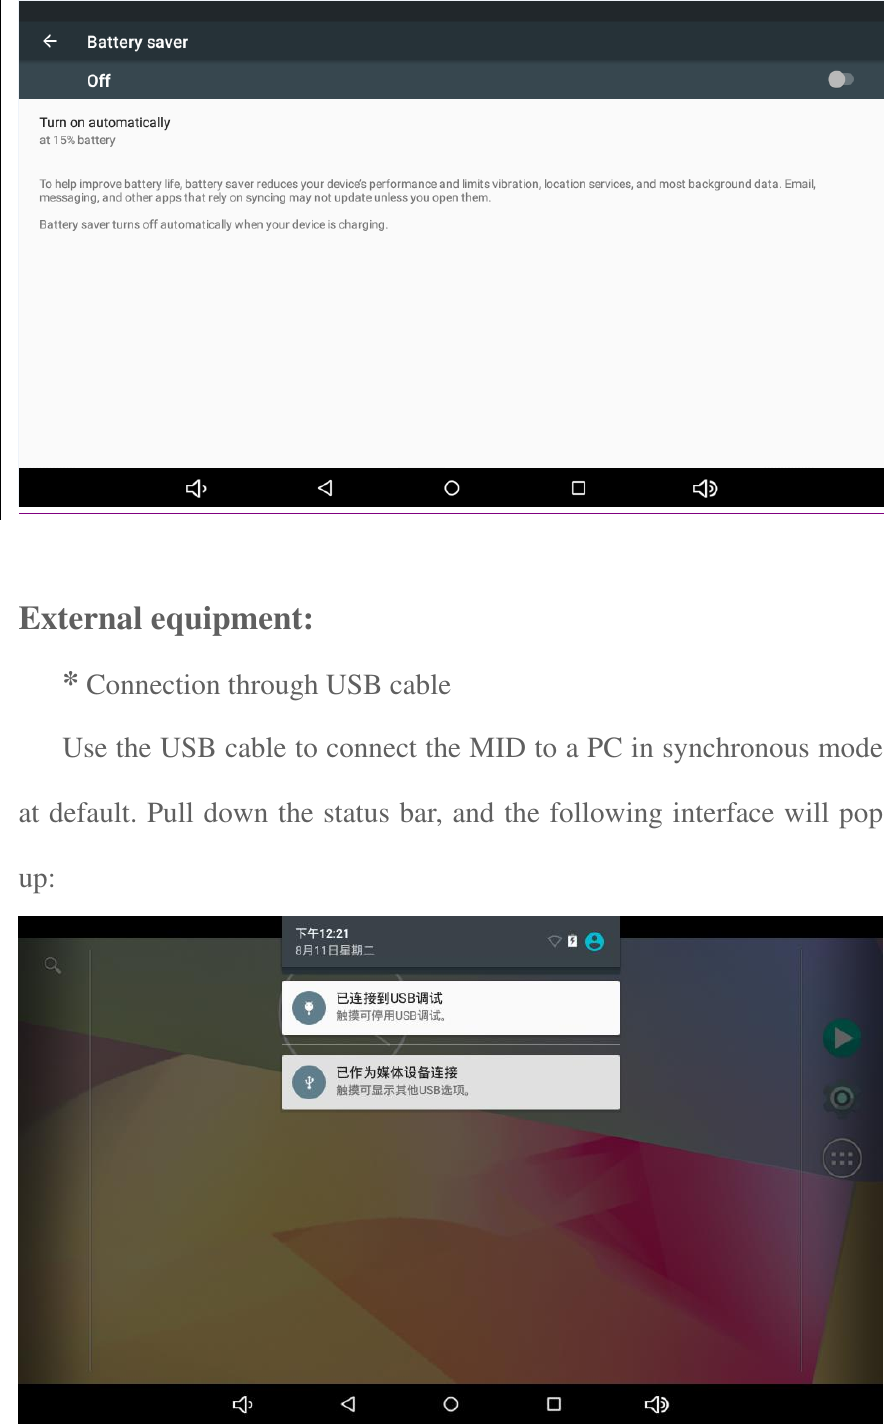    External equipment:   * Connection through USB cable  Use the USB cable to connect the MID to a PC in synchronous mode at default. Pull down the status bar, and the following interface will pop up:        